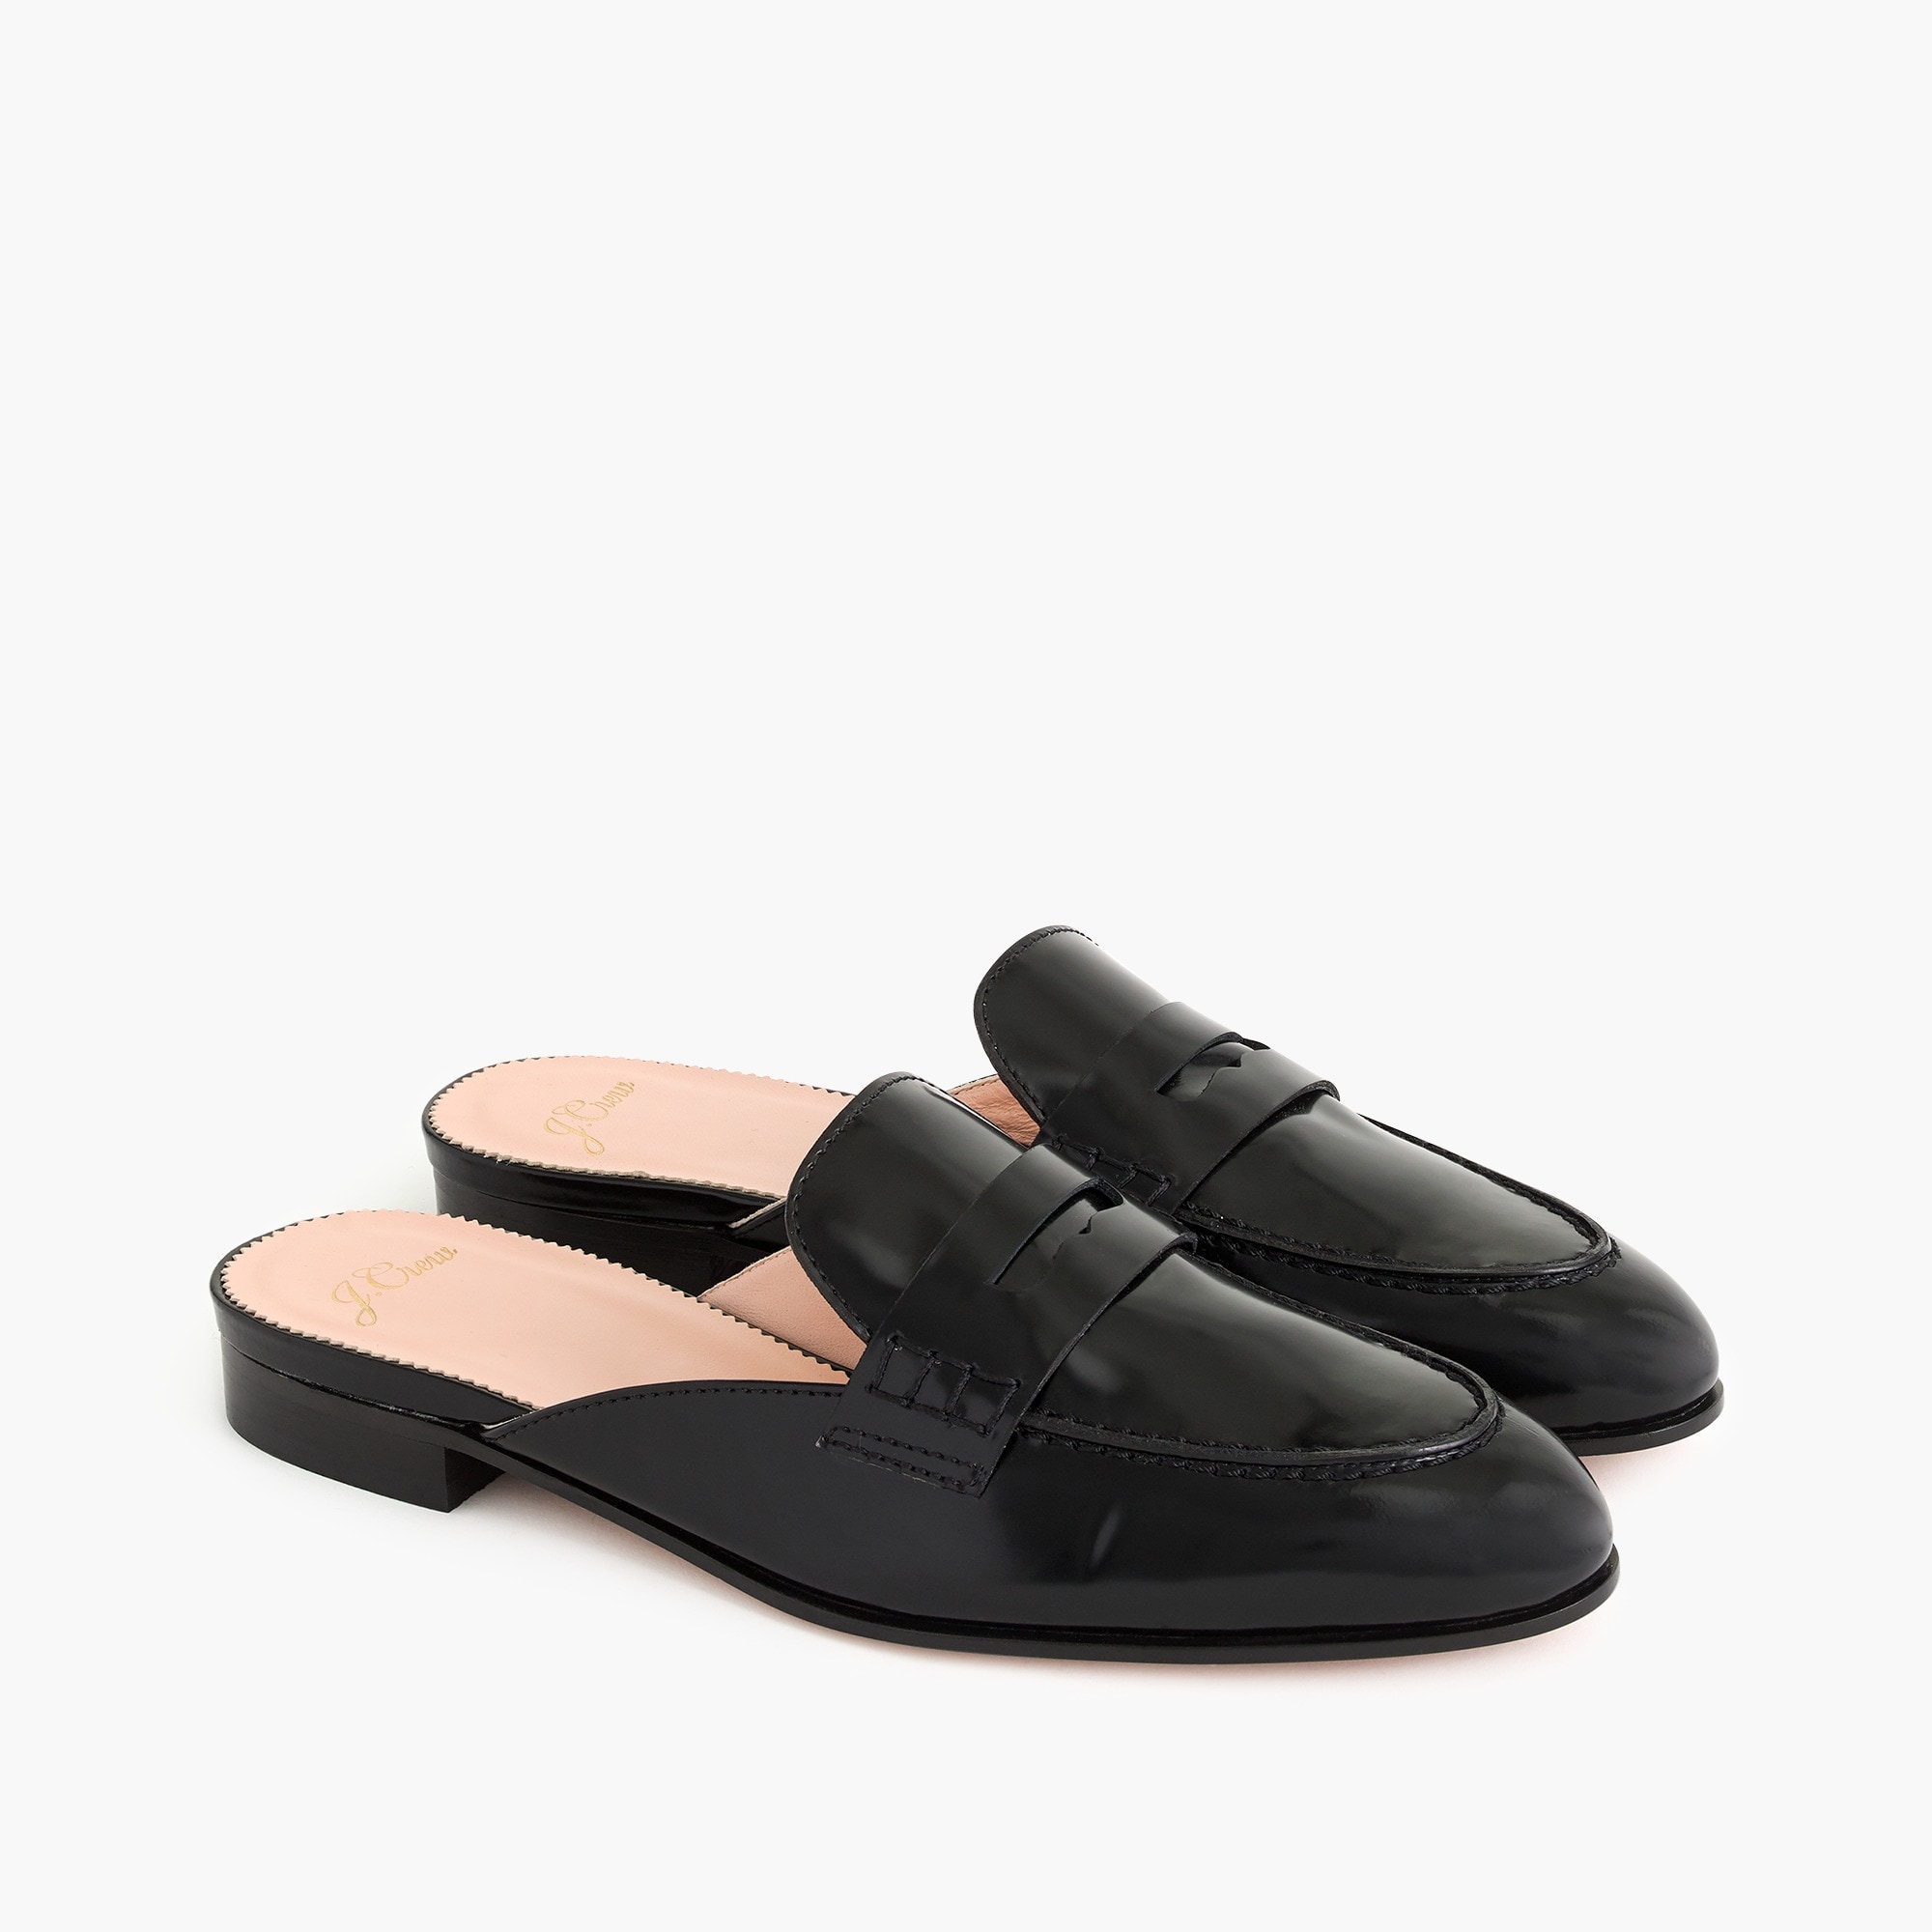 patent leather loafers womens